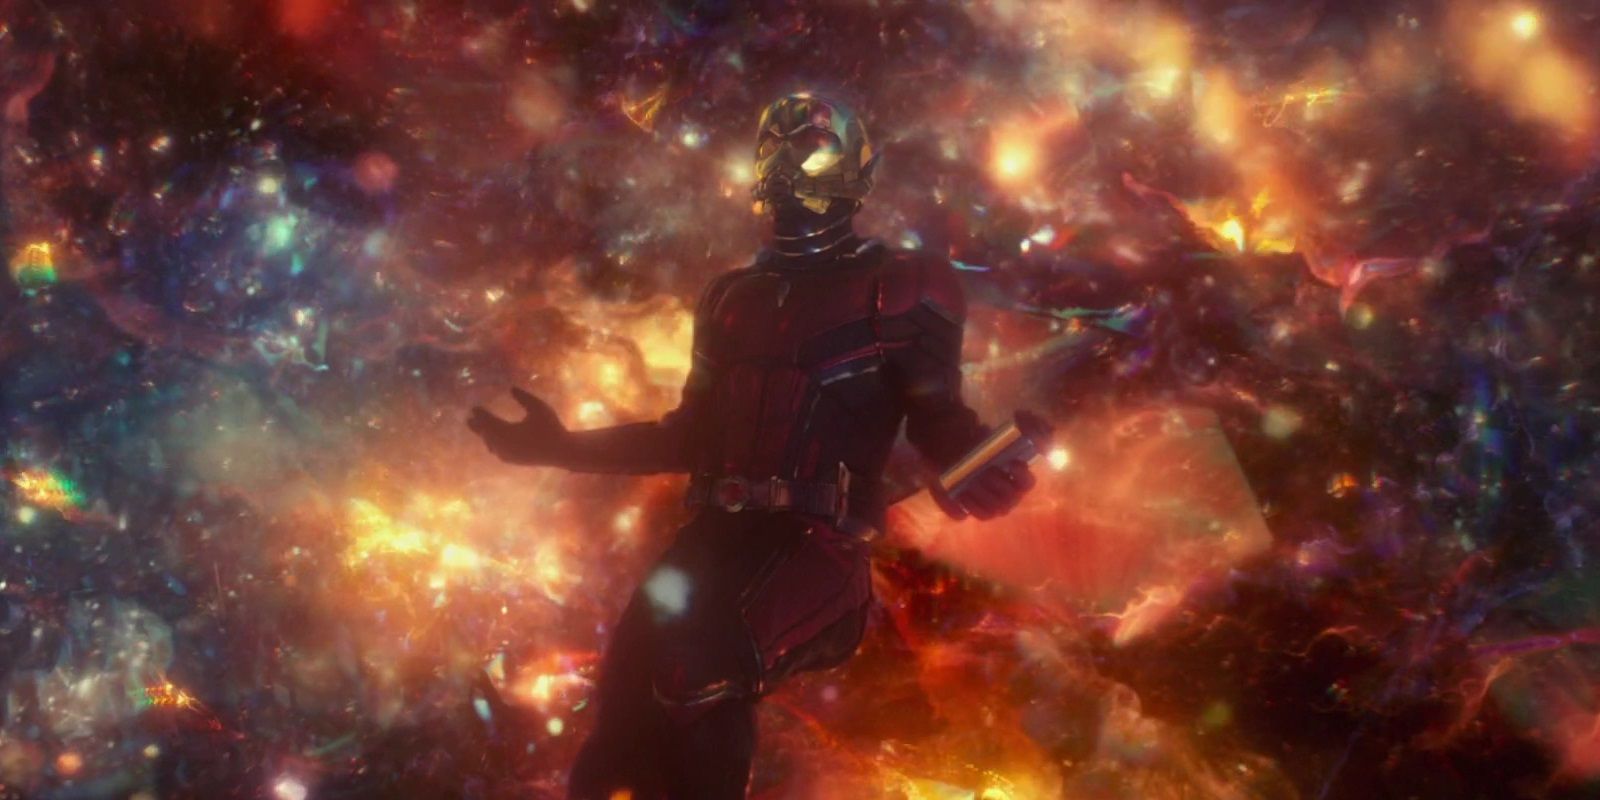 Scott Lang is stranded in the Quantum Realm in Ant-Man and the Wasp